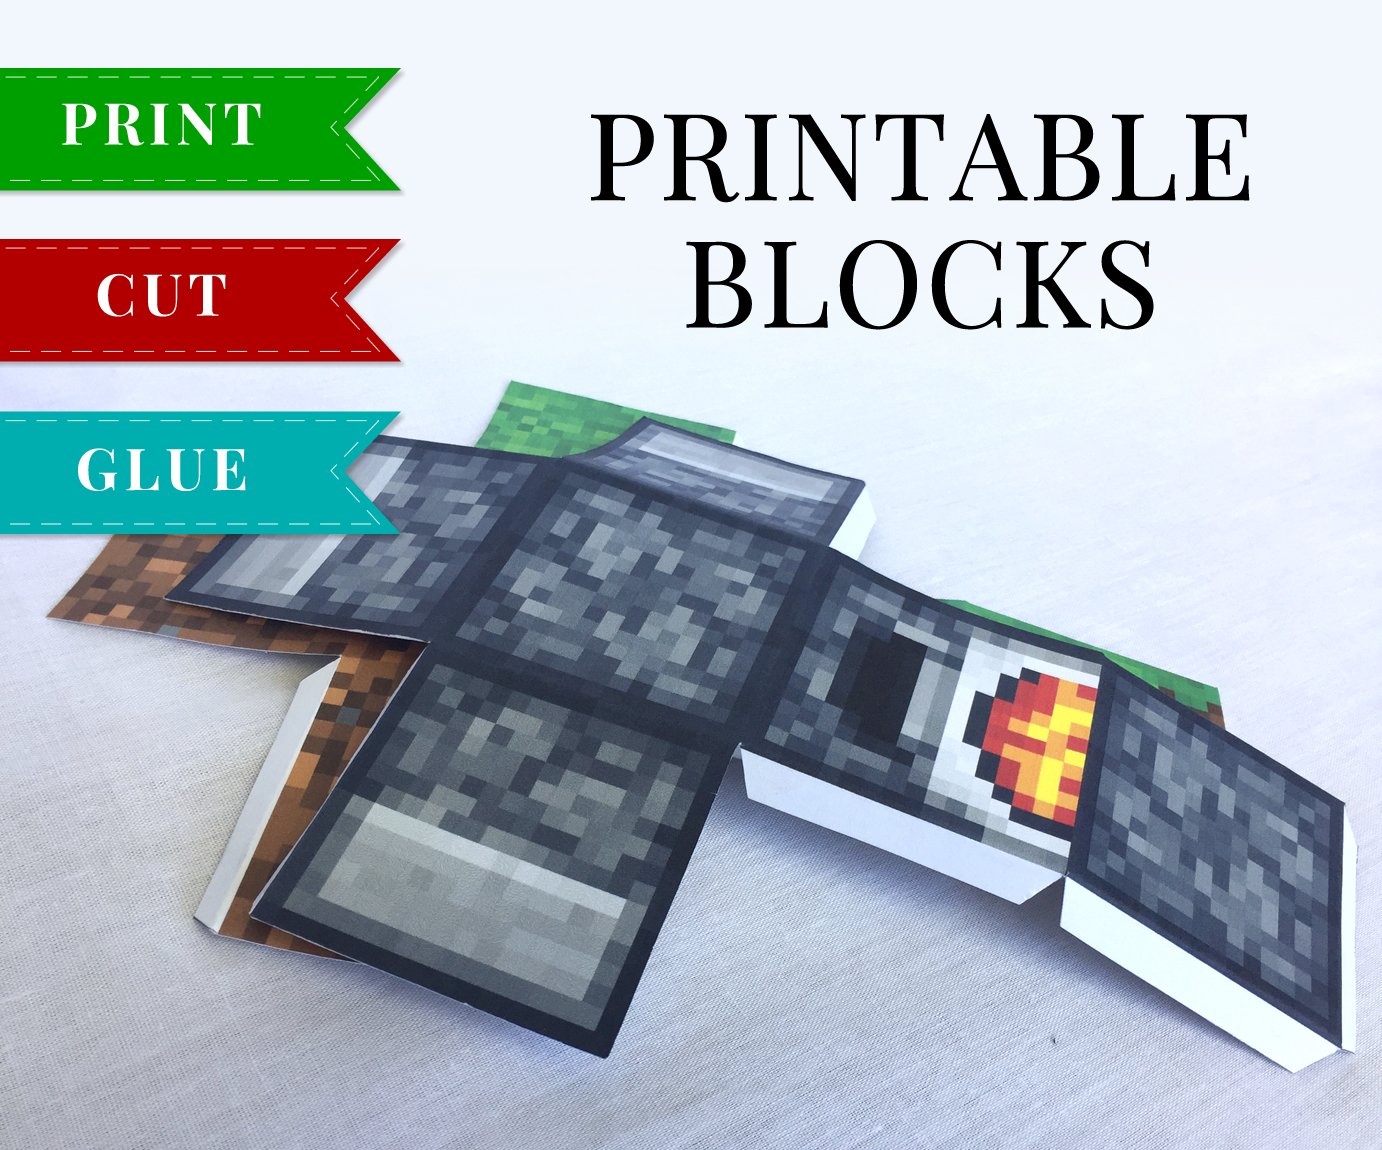 KatsBits.com on X: Minecraft themed papercraft dominoes   something totally off-topic (not 3D at all!) to  encourage less screen time for kids. PDF available for printing. #Minecraft  #papercraft #dominoes #kids #tabletopgames #irl #